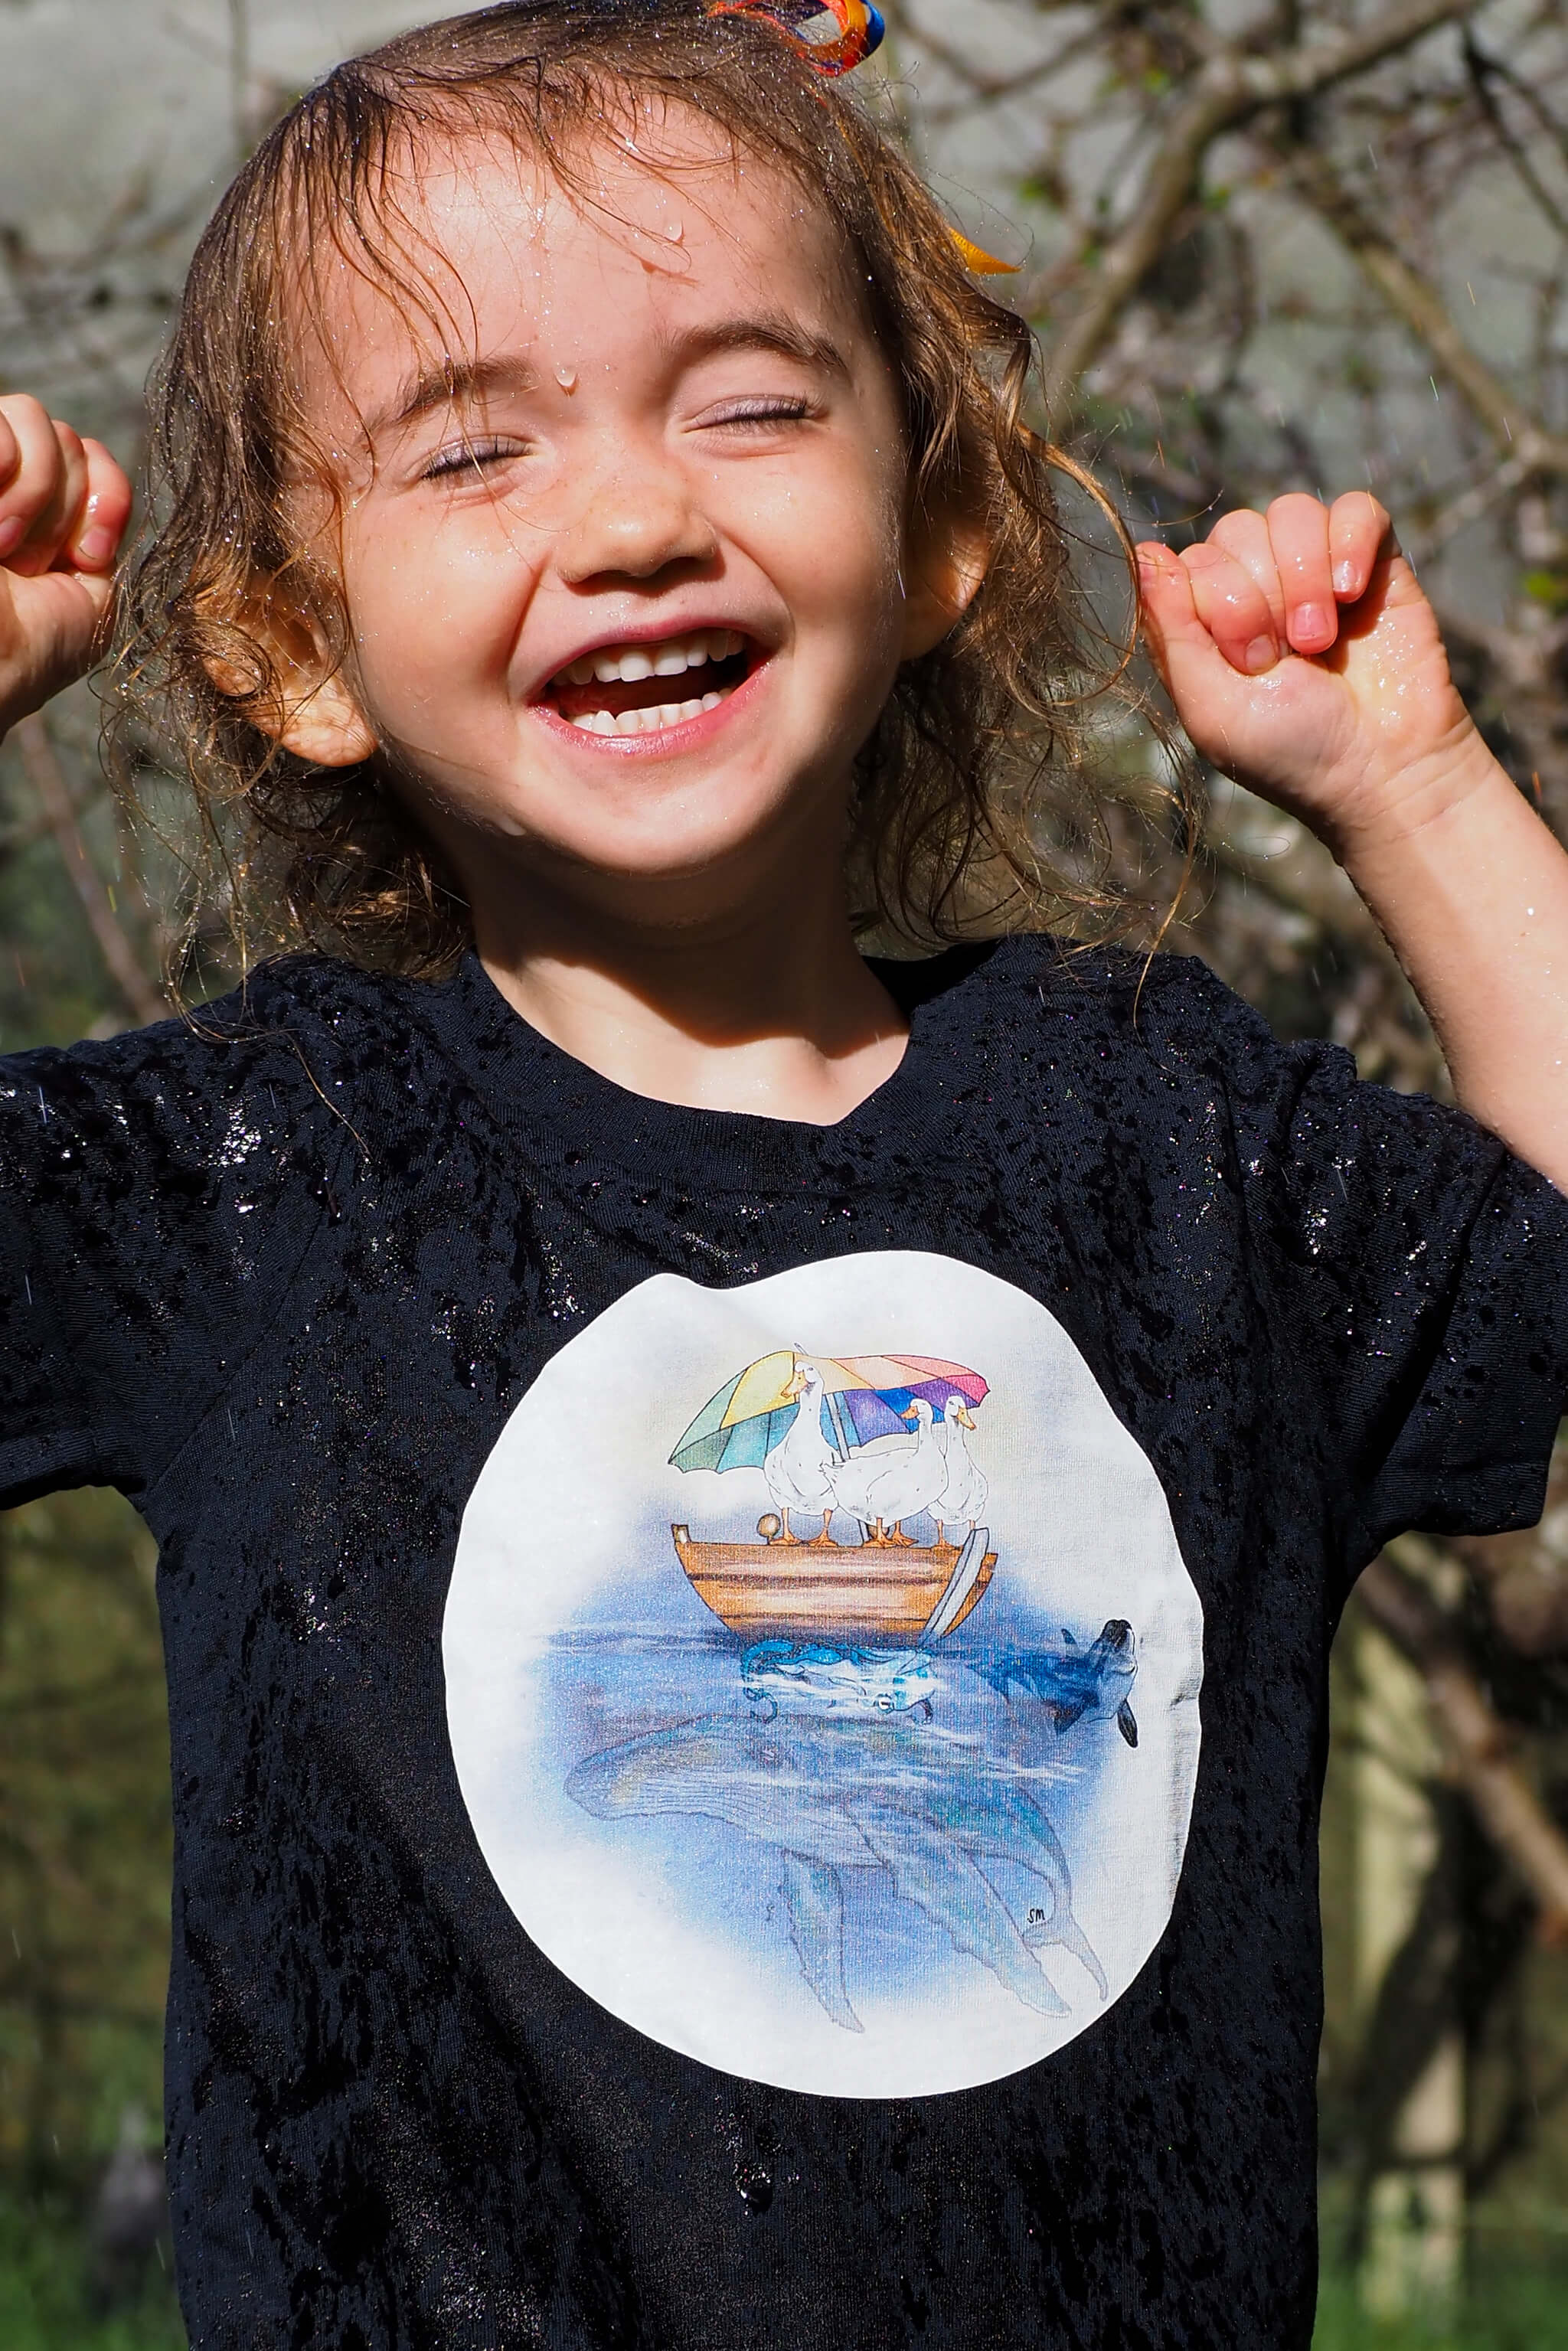 Ducks Out To Sea tee - Limited Edition Tshirts SARAH MCALPINE ART